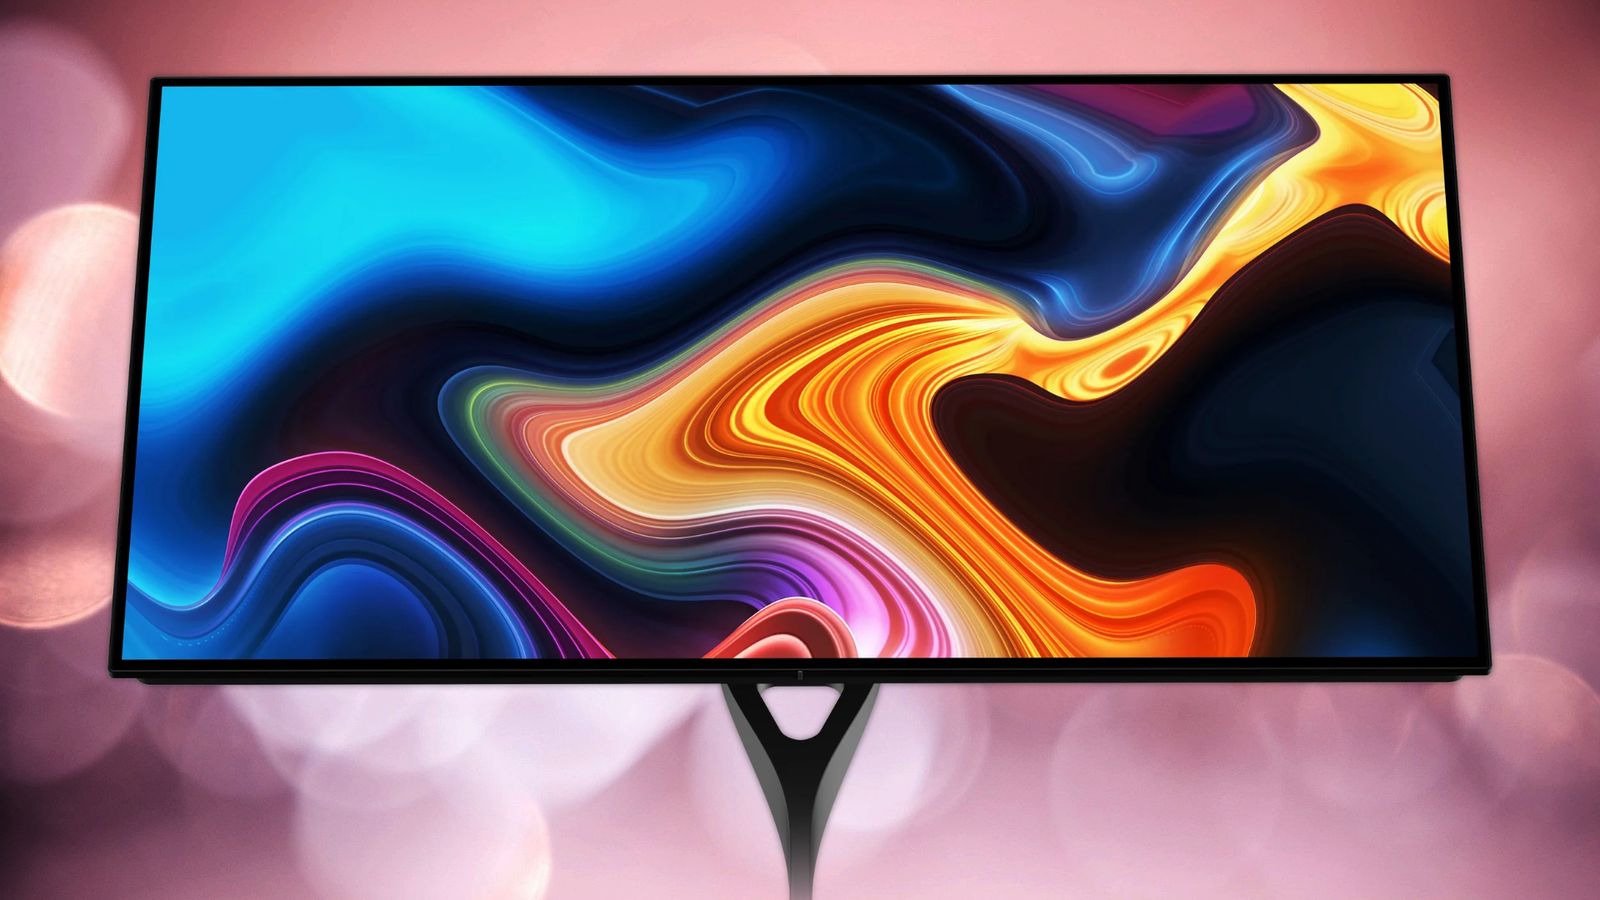 A Dough Spectrum One gaming monitor against a pink background